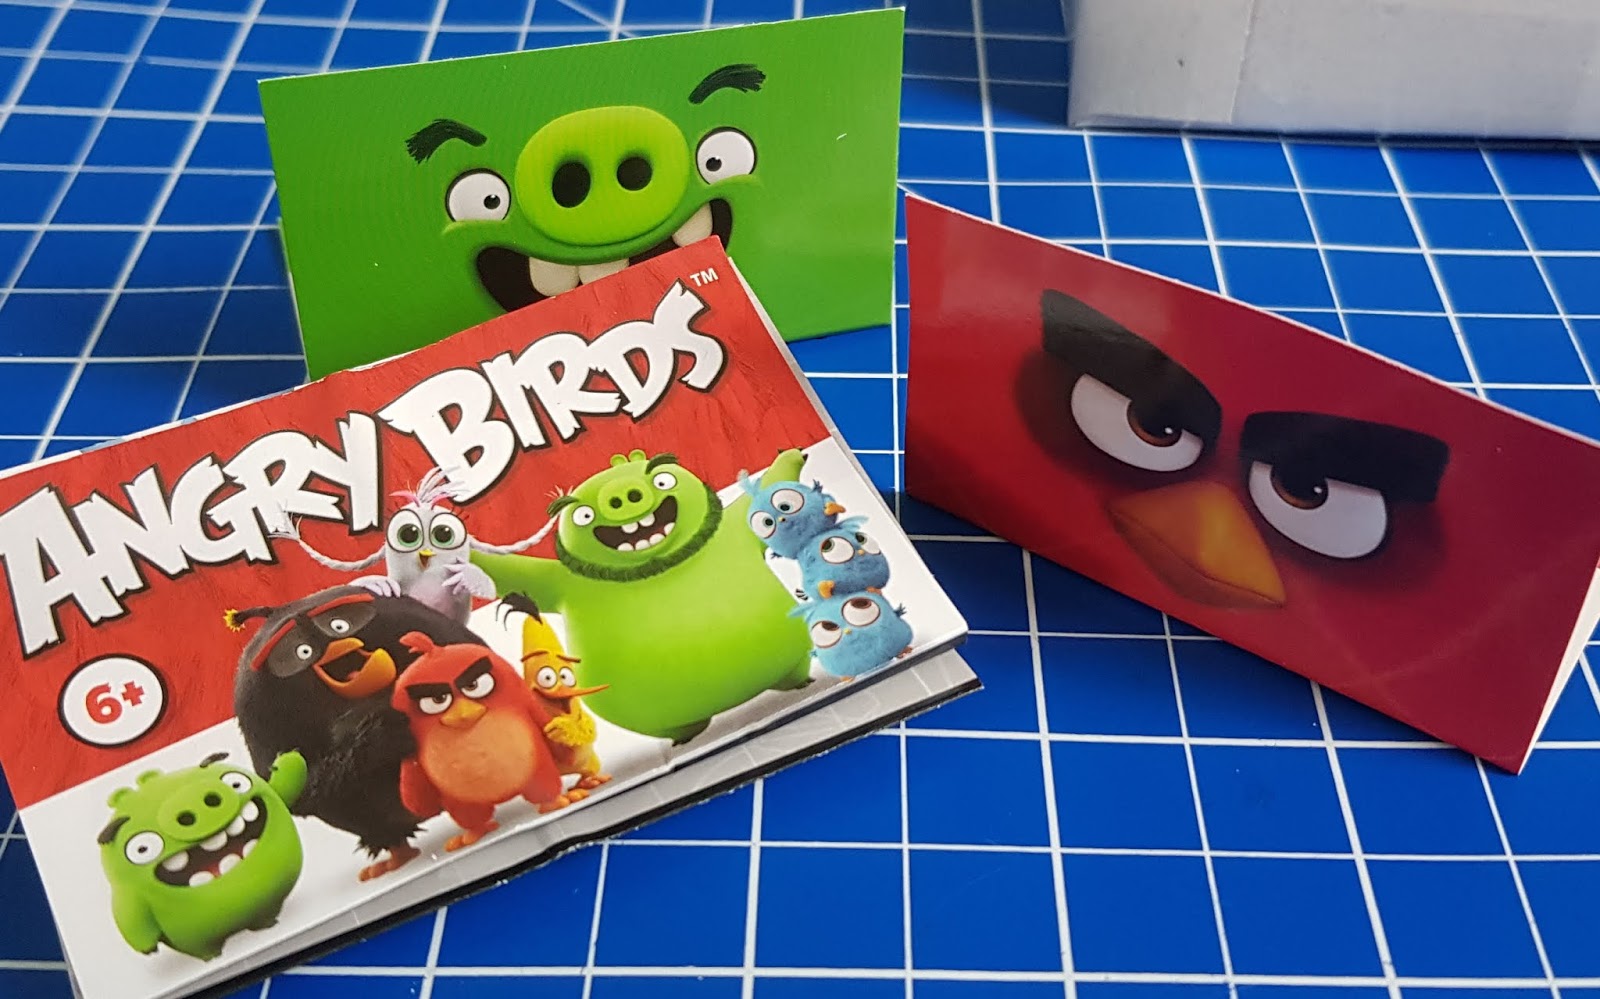 angry birds game toys